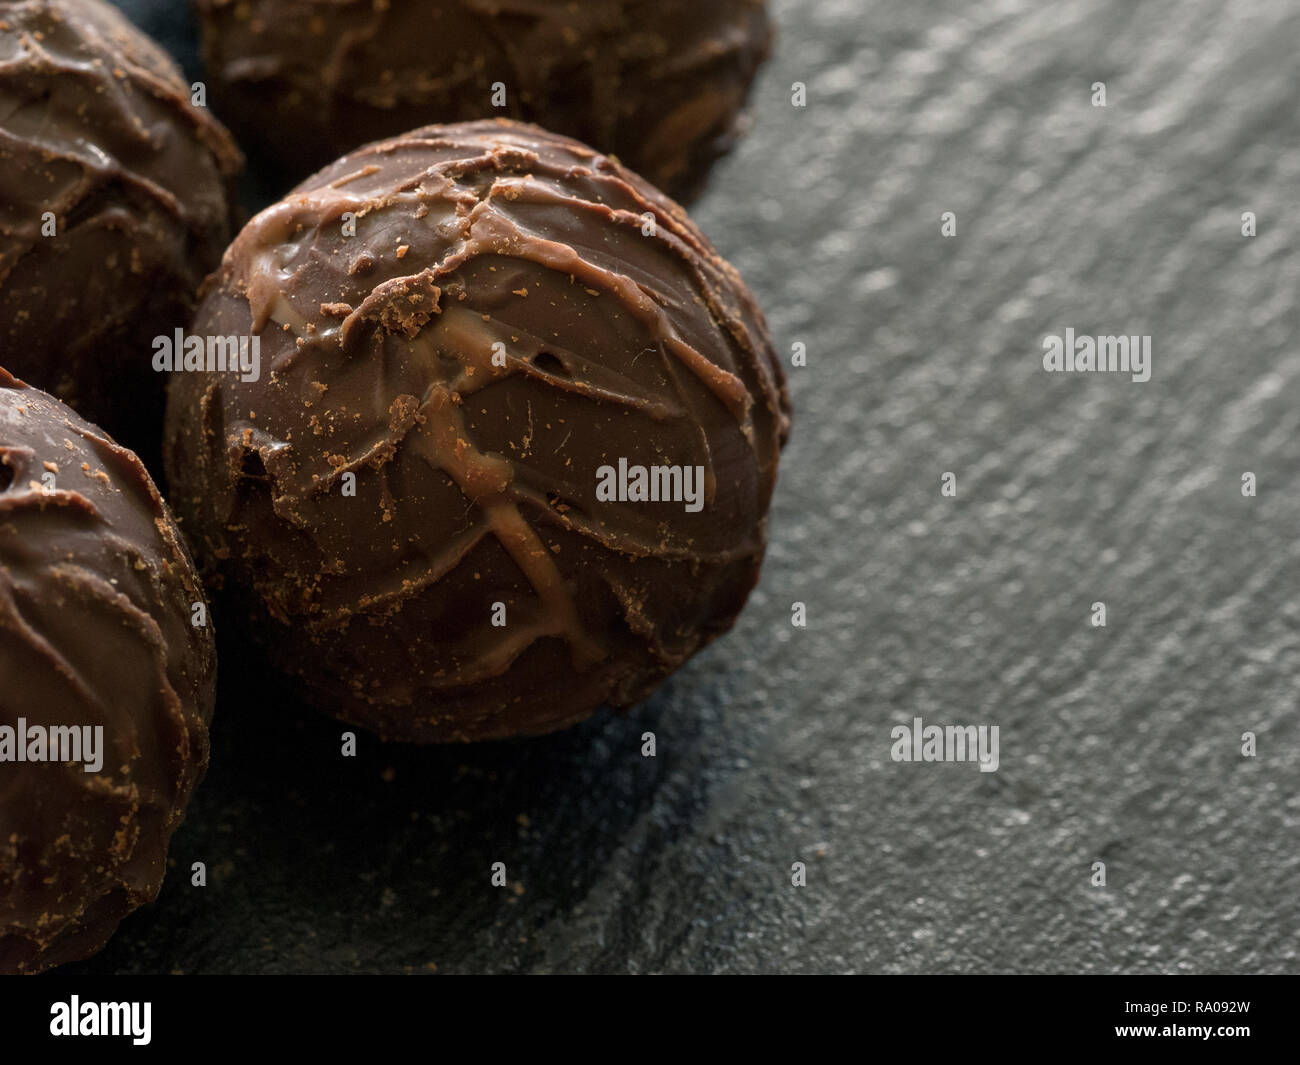 Close-up of round chocolate pralines on a slate plate Stock Photo